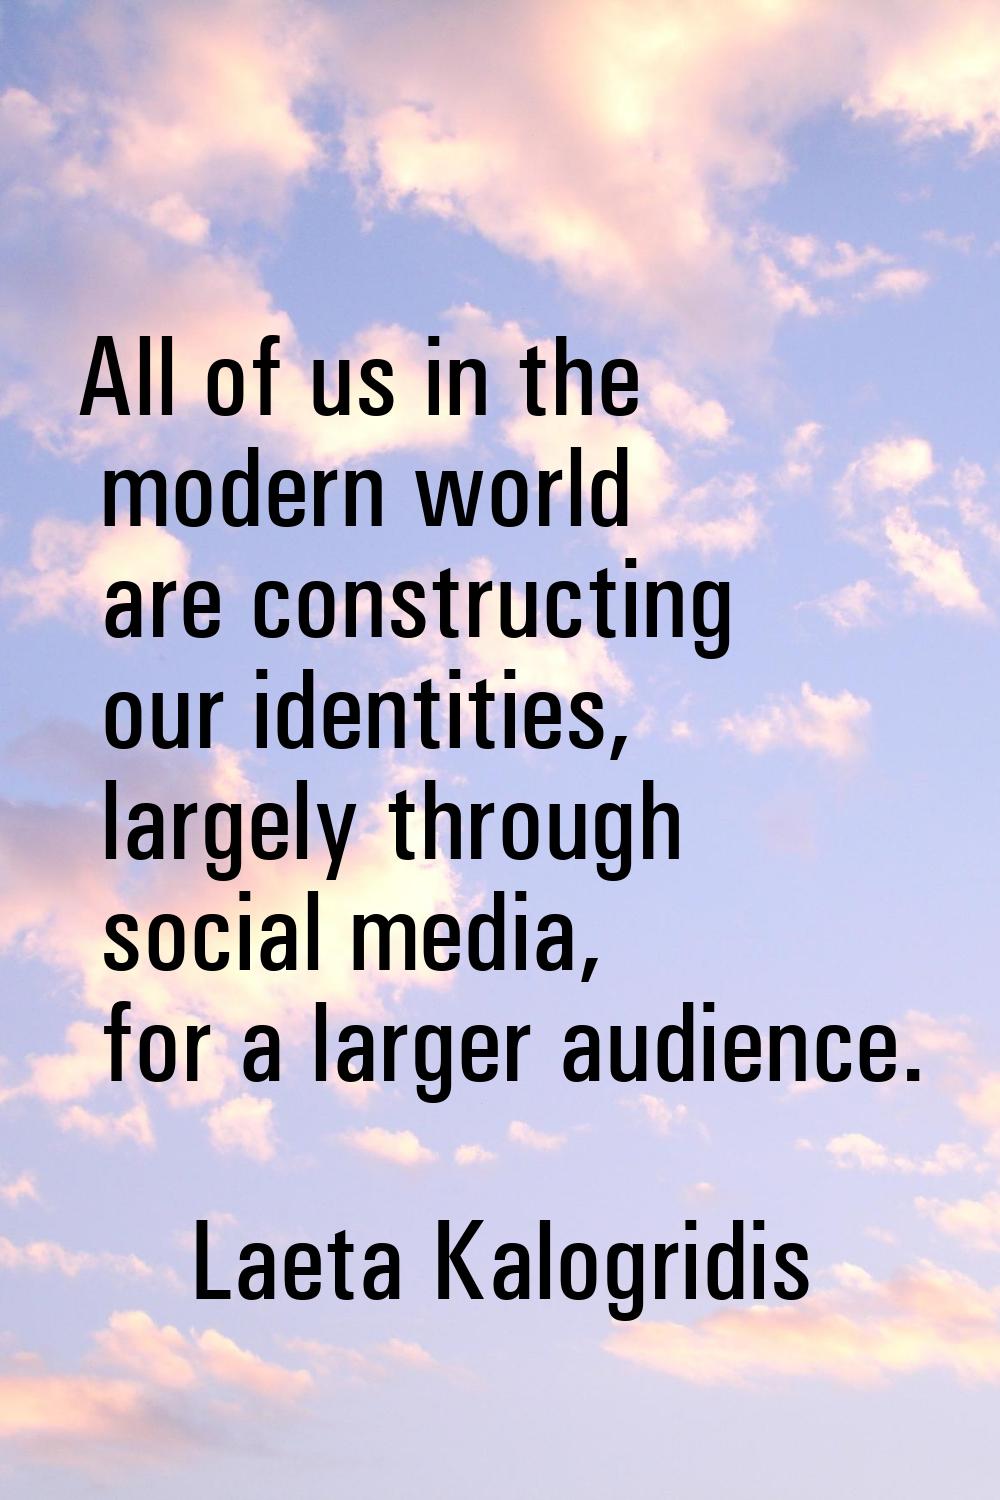 All of us in the modern world are constructing our identities, largely through social media, for a 